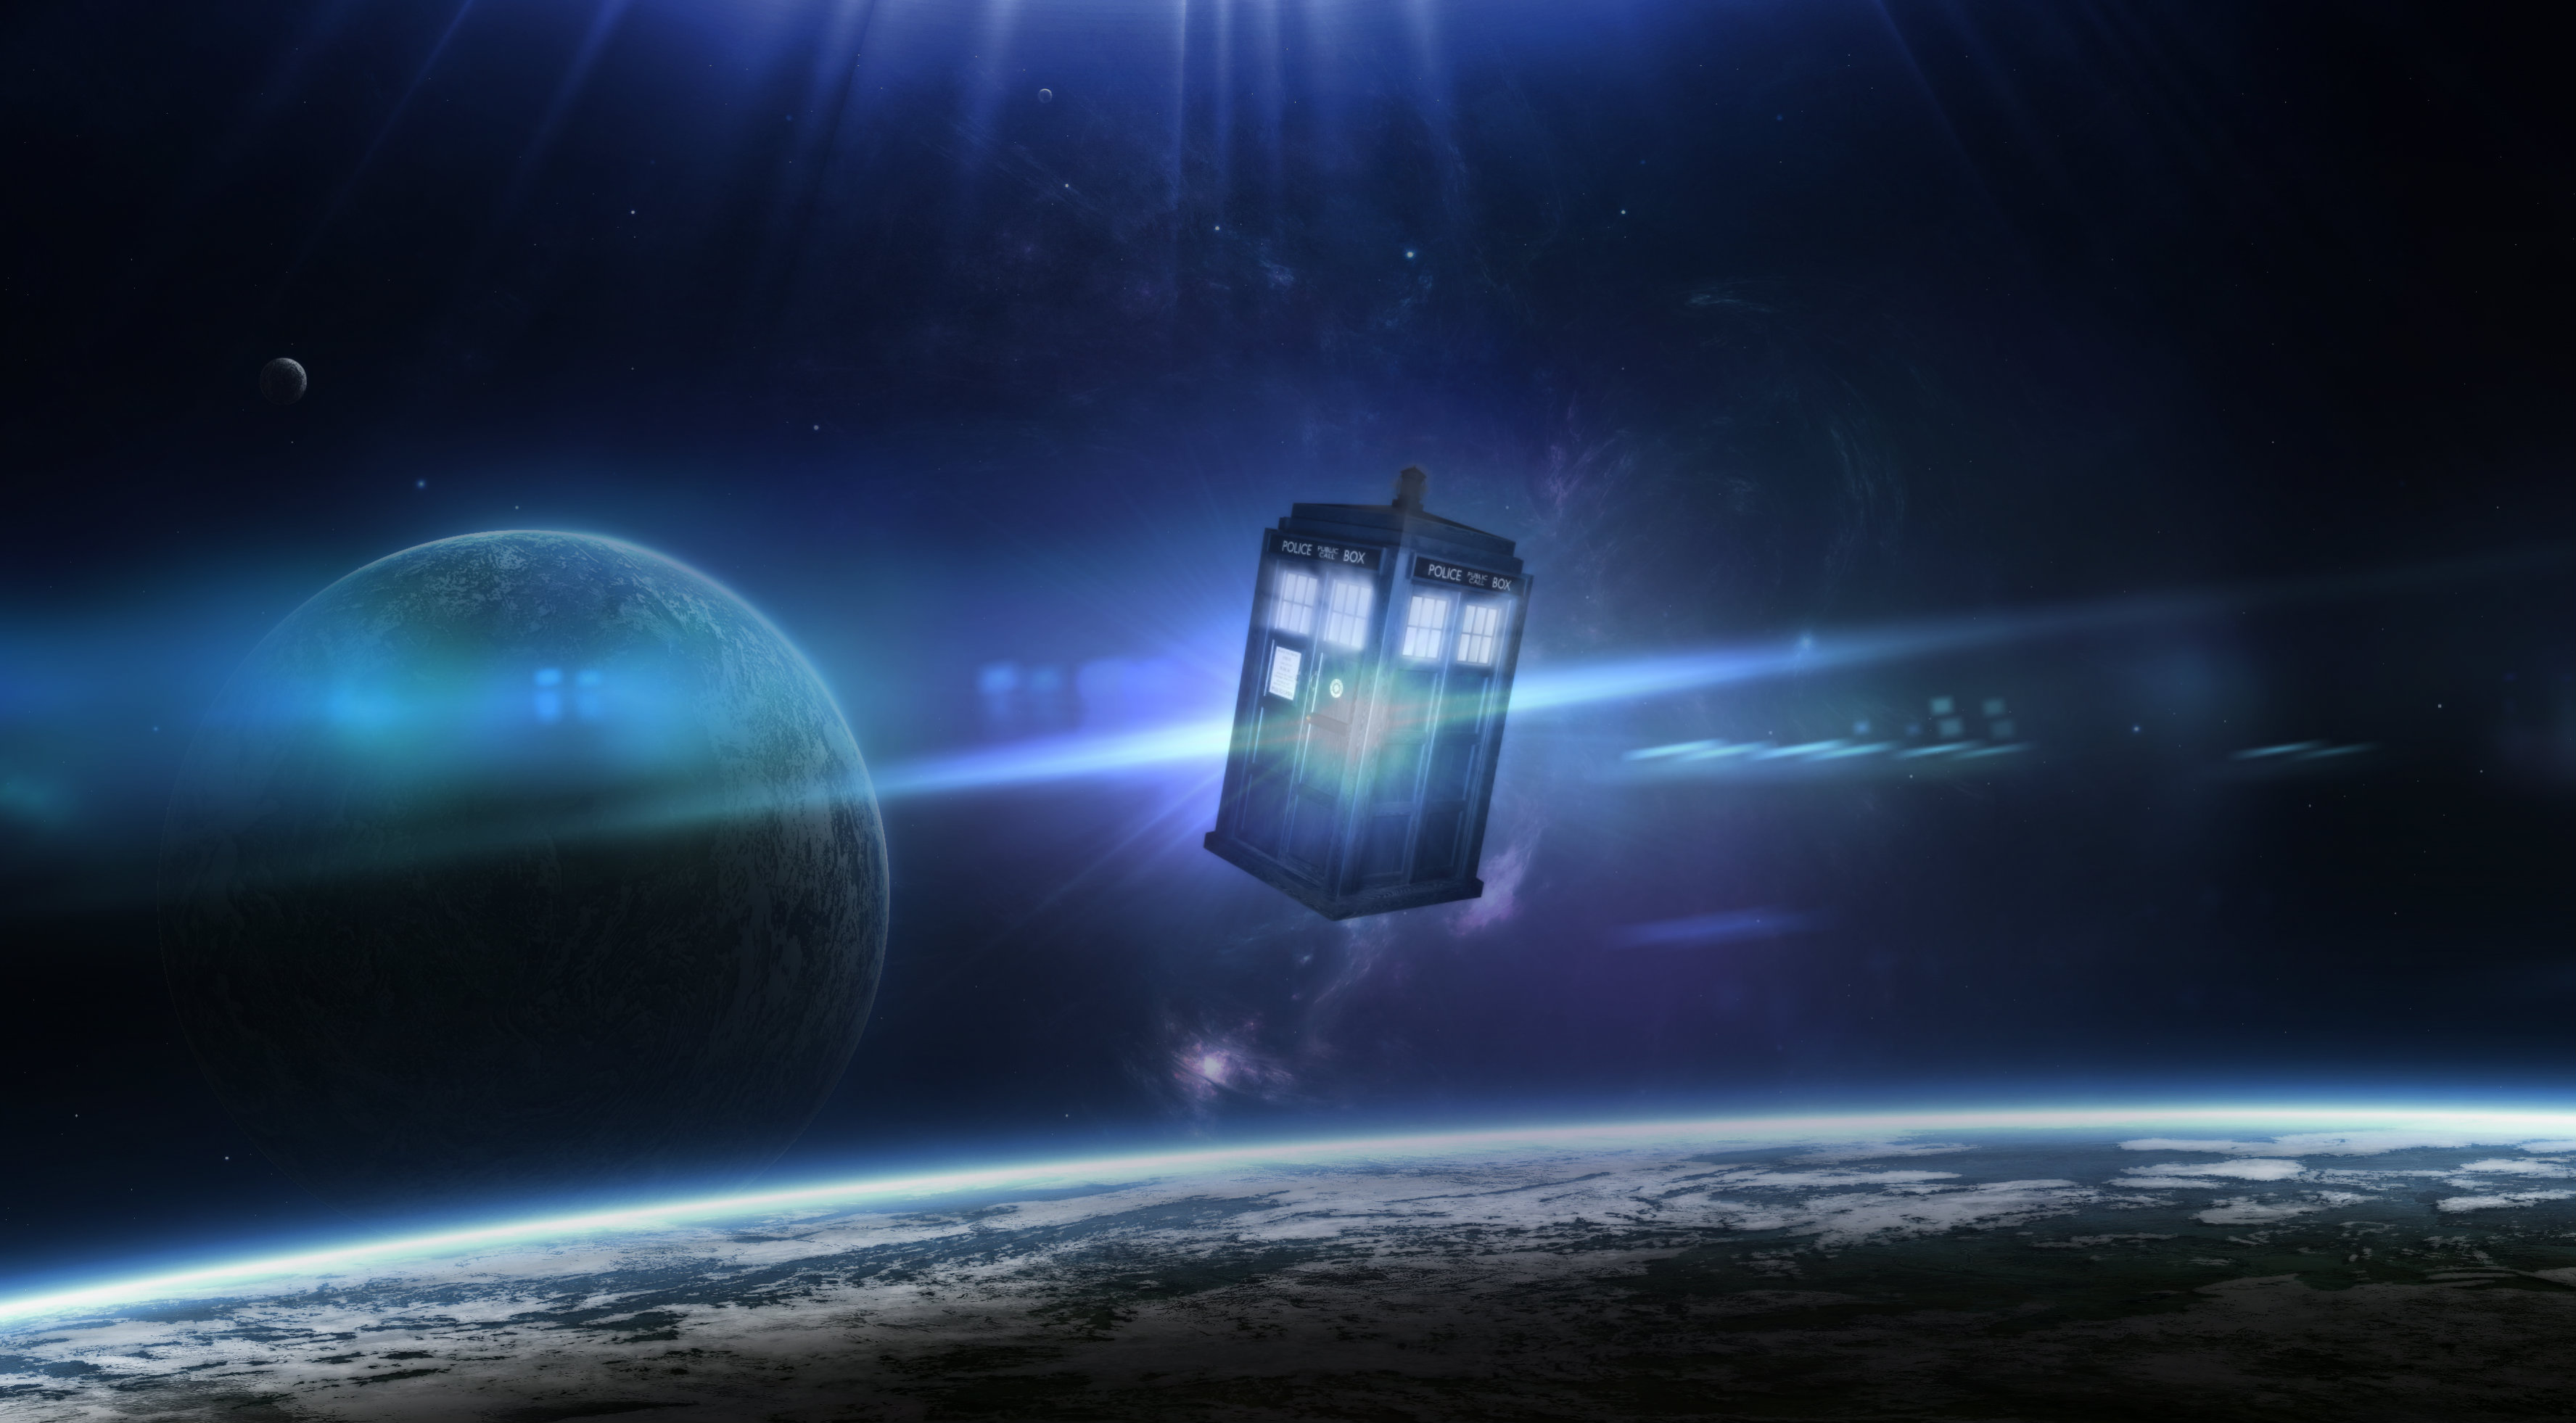 Dr who wallpaper